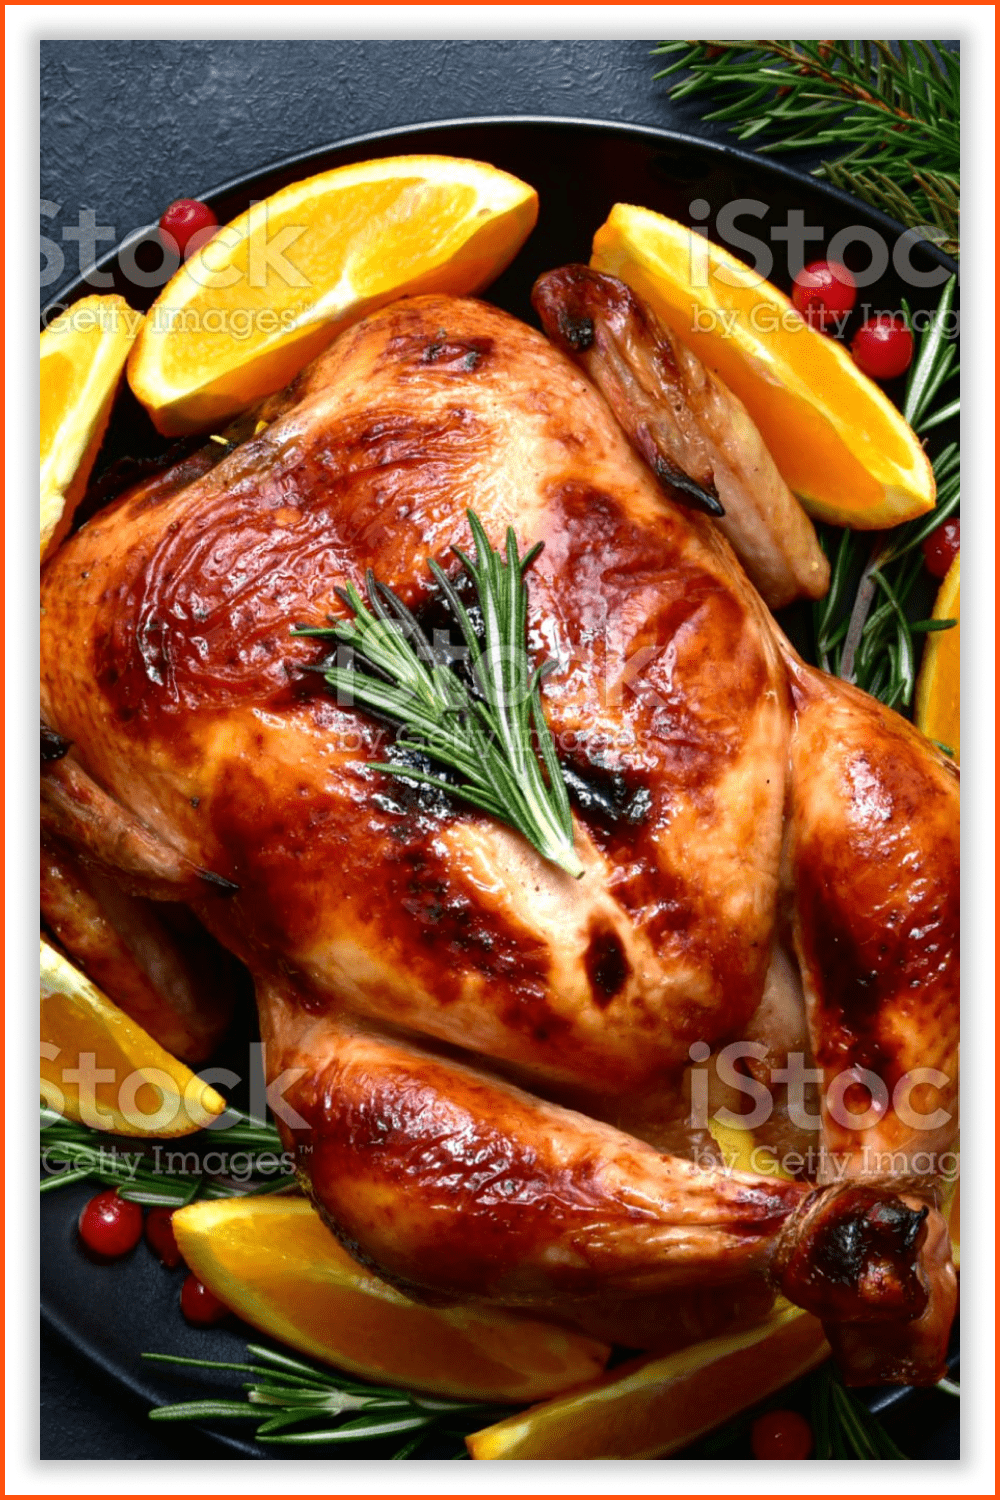 Photo of a Roasted Christmas chicken with oranges, rosemary, and cranberries.